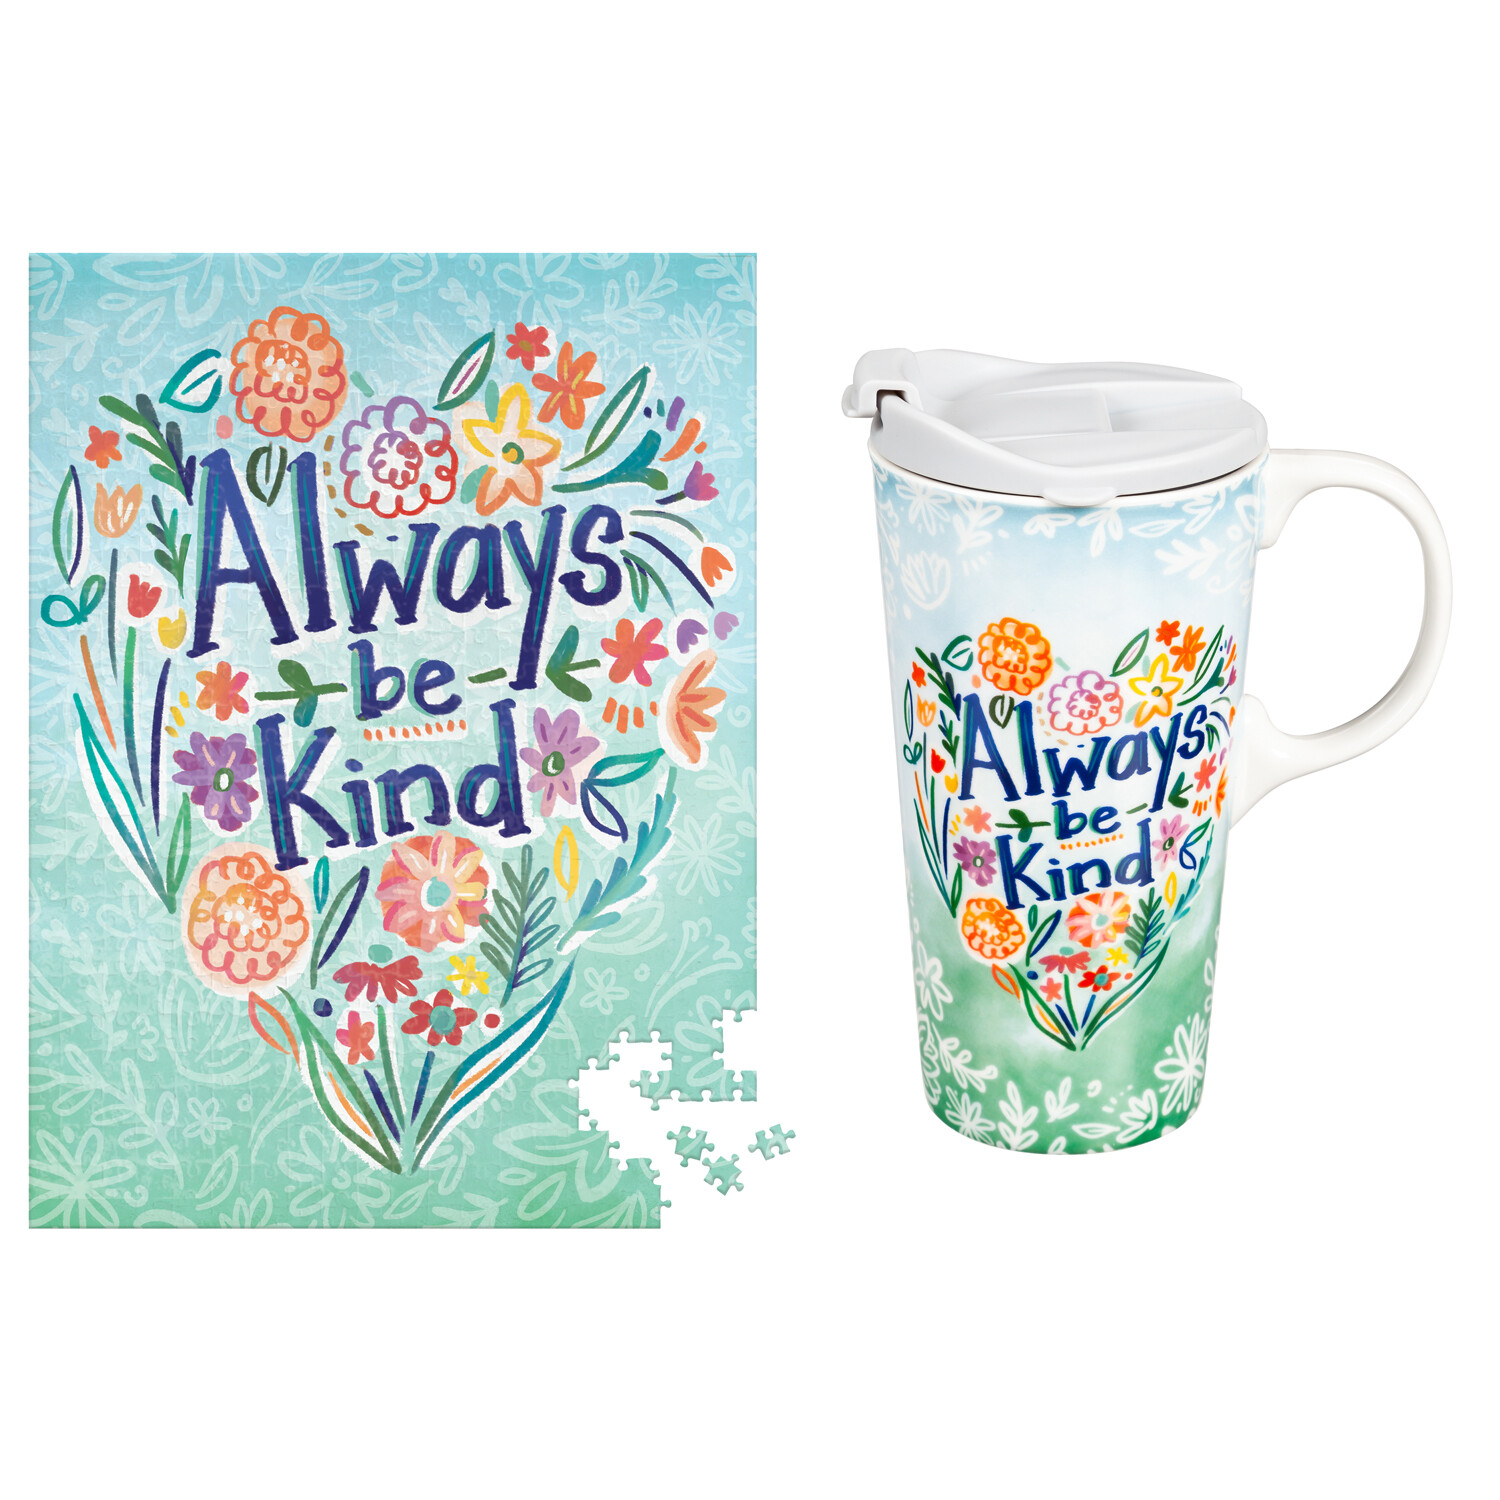 Ceramic Cup & Puzzle Gift Set - Hope & Kindness